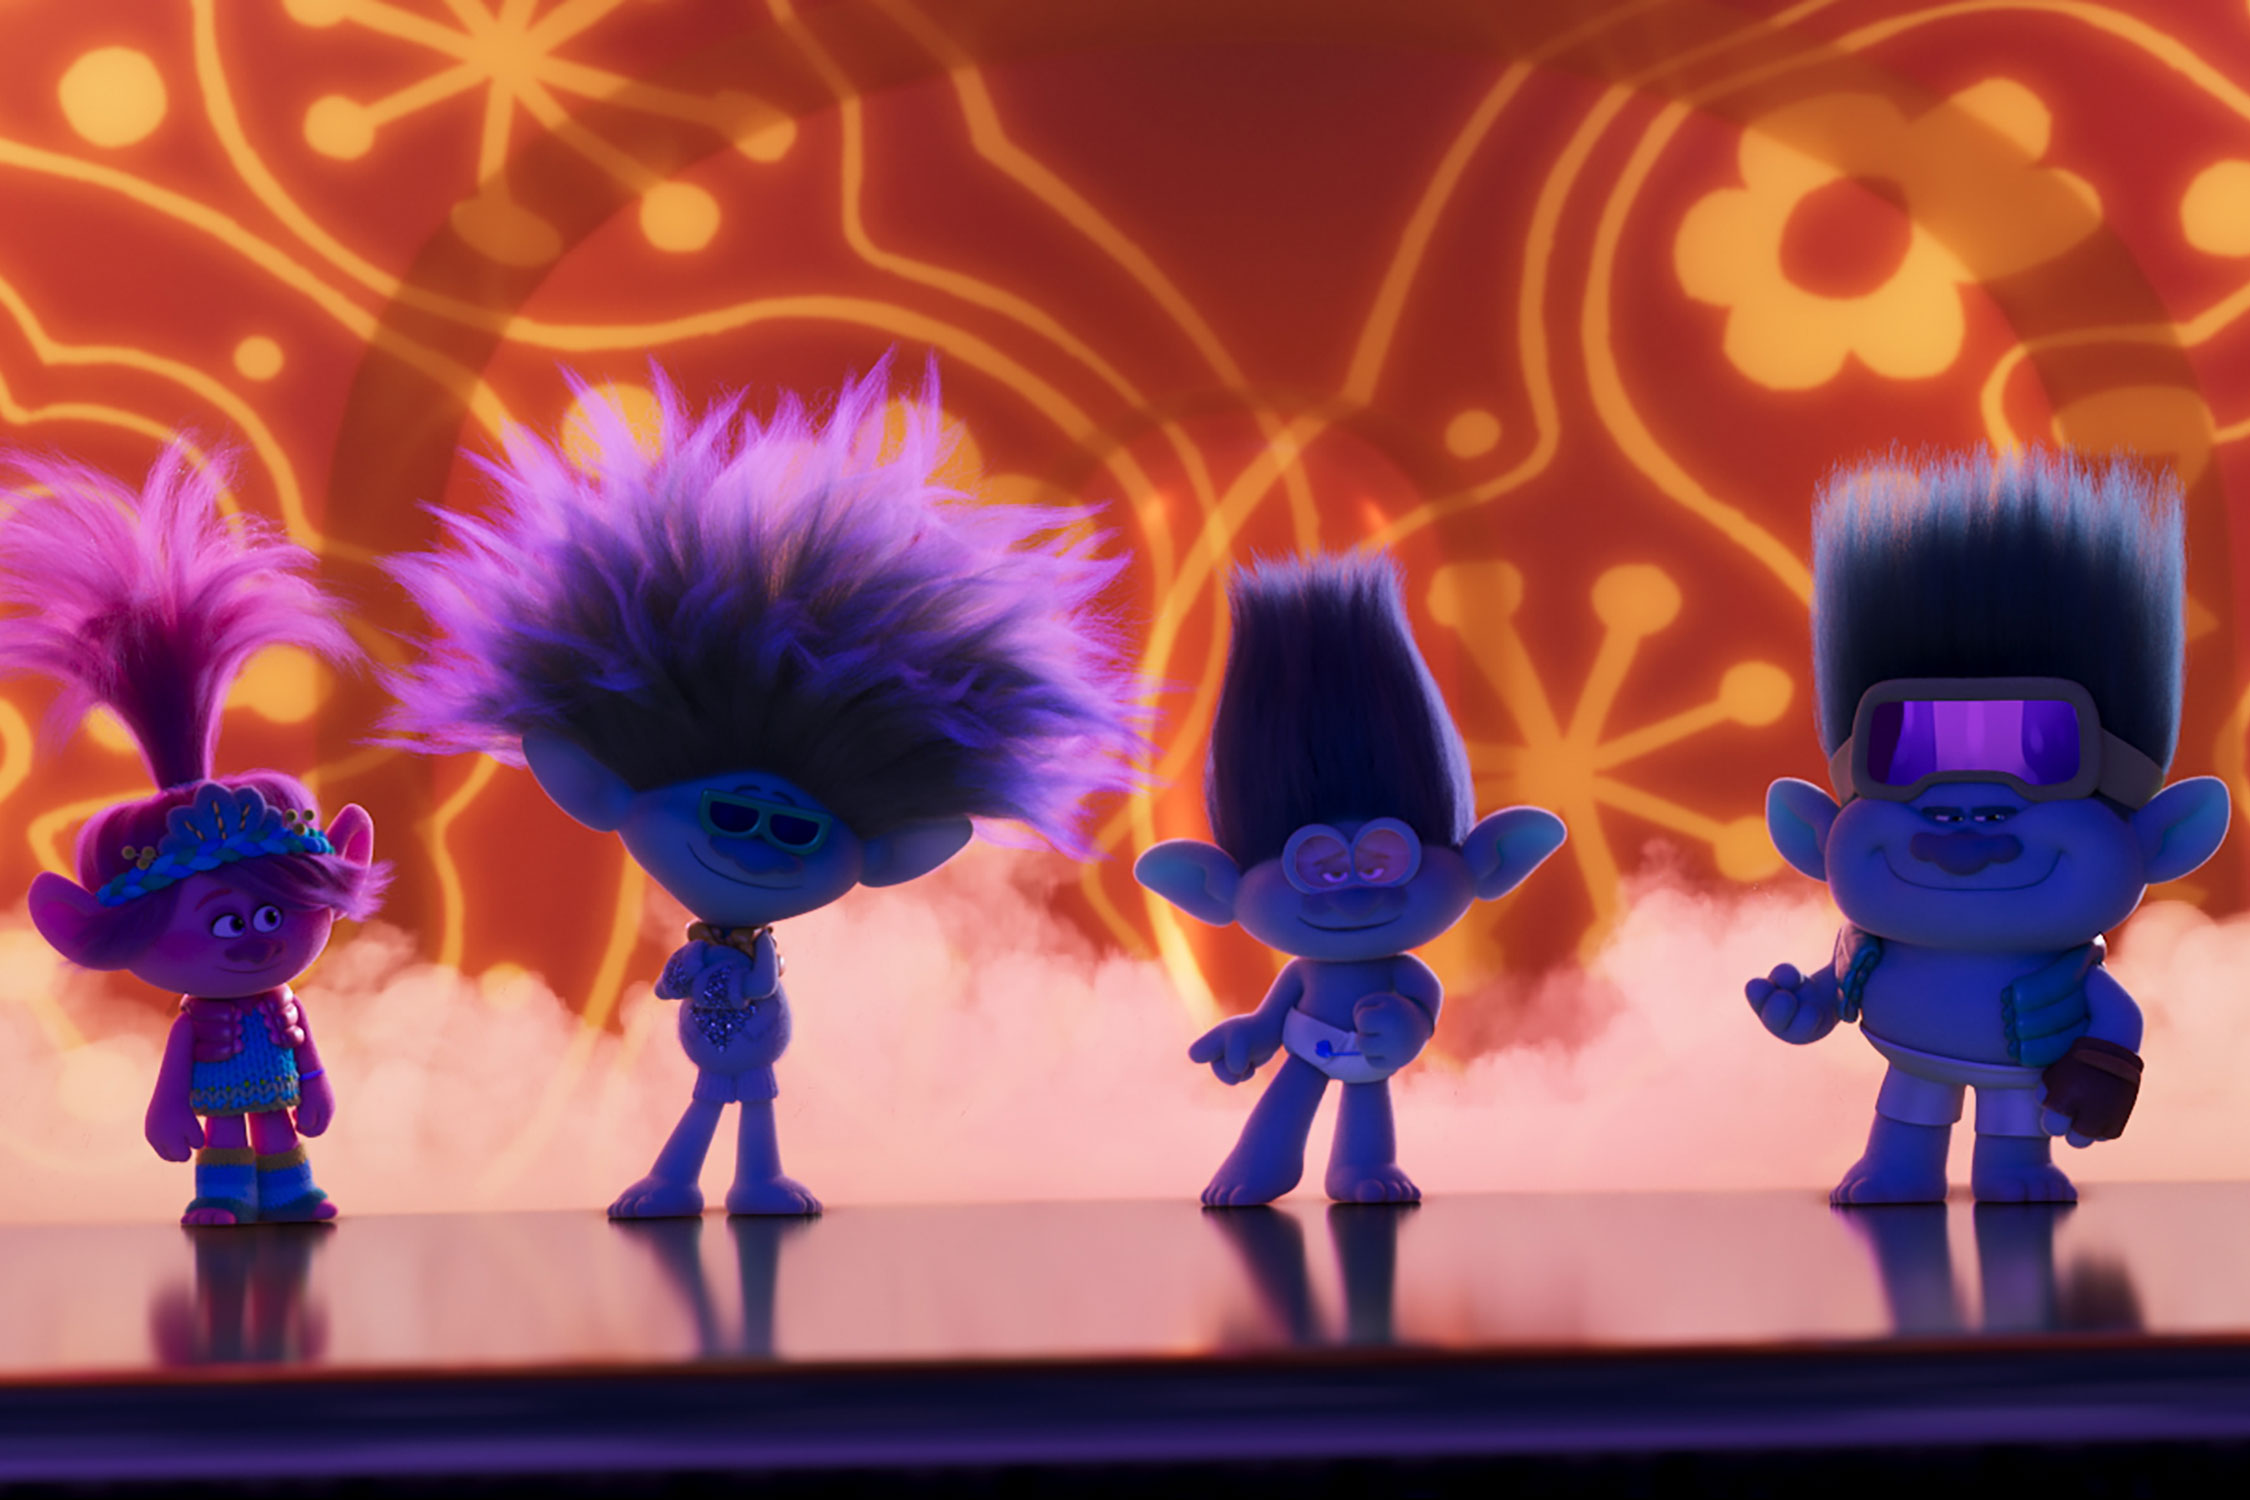 Where To Watch Trolls Band Together Online